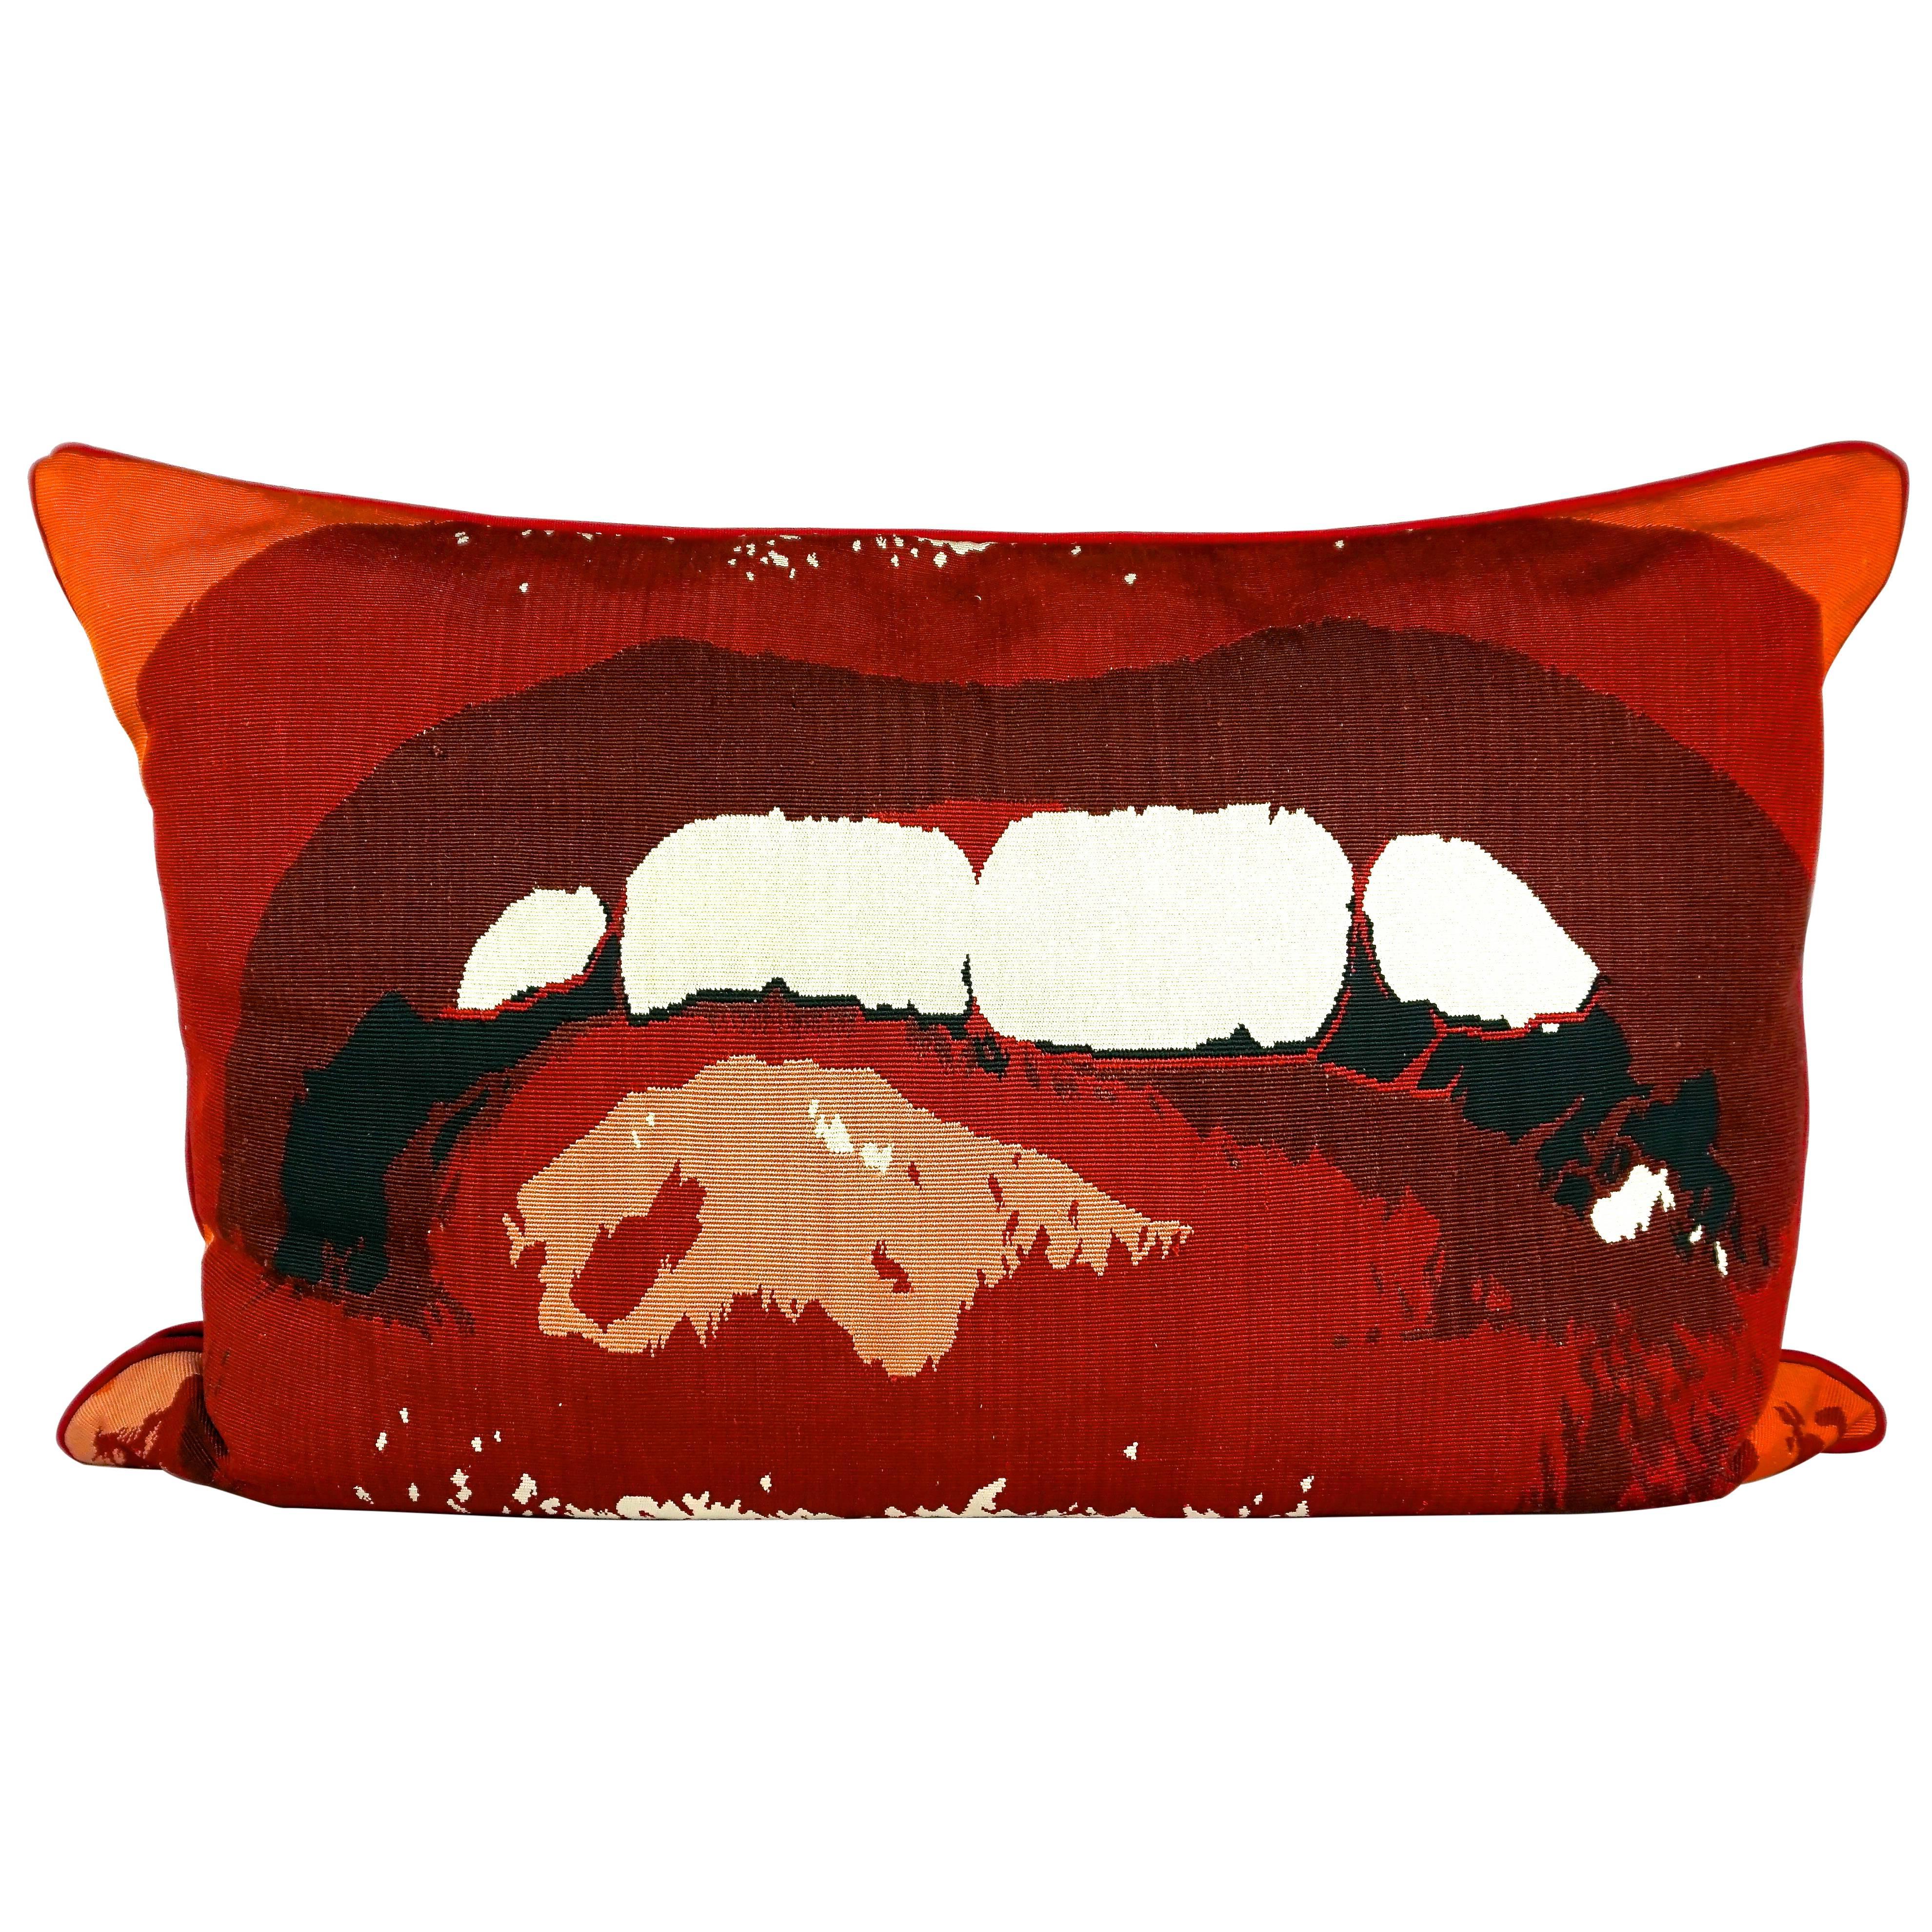 Vivienne Westwood "Mouth" Large Cushion For Sale